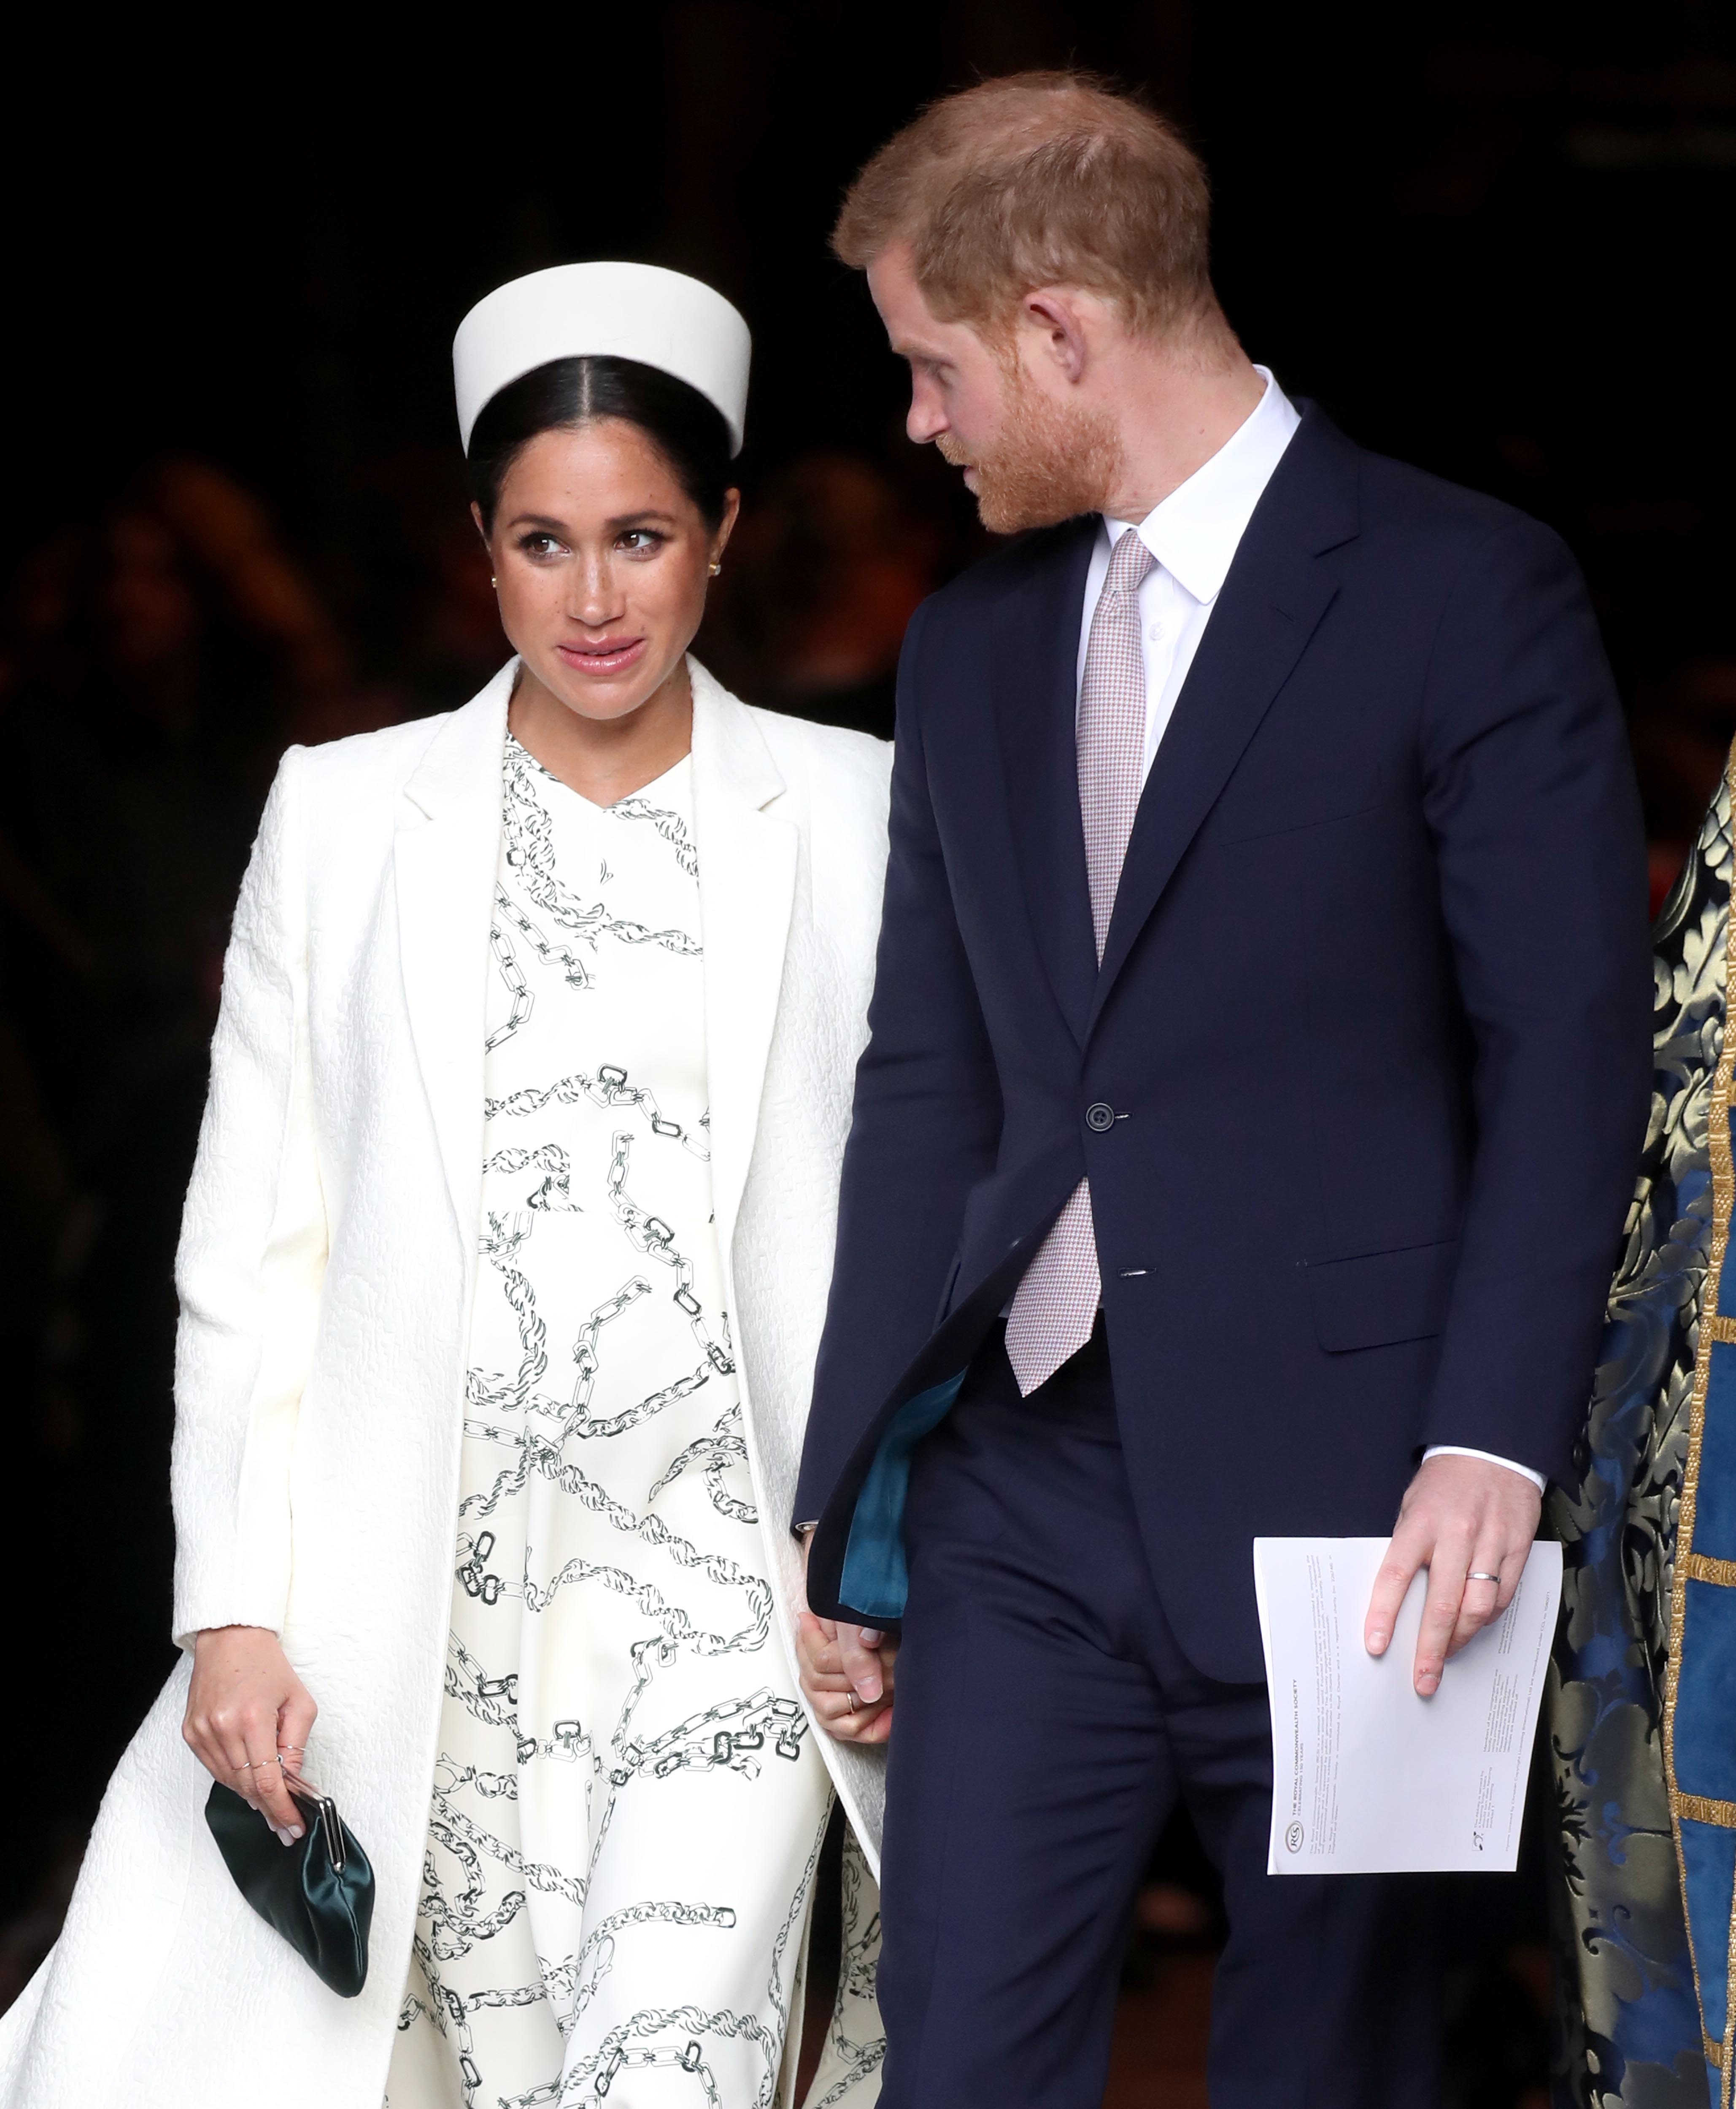 Meghan Markle and her husband Prince Harry | Photo: Getty Images